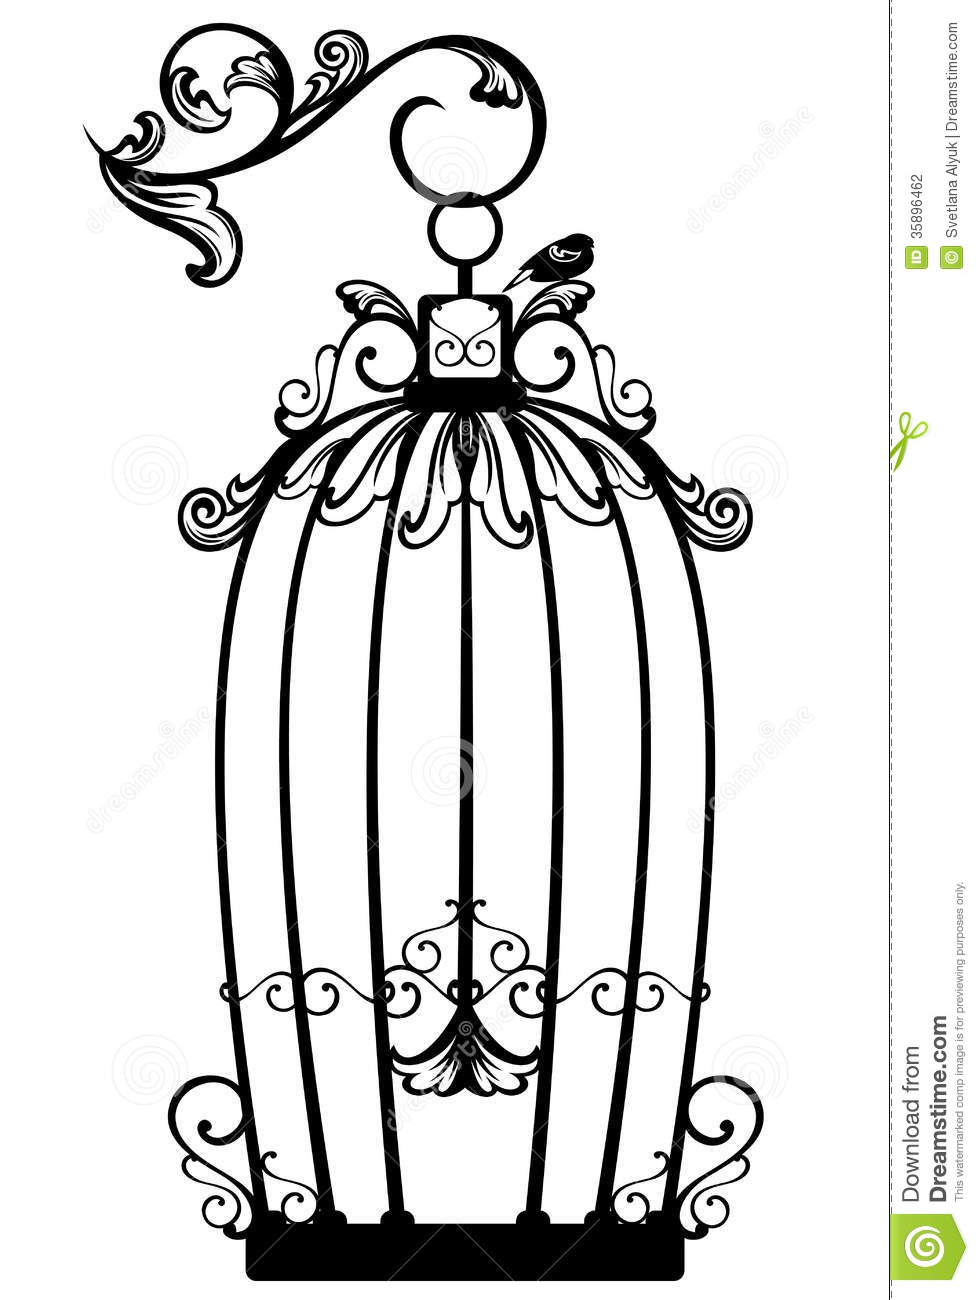 Open Birdcage With A Free Bird   Black And White Decorative Outline